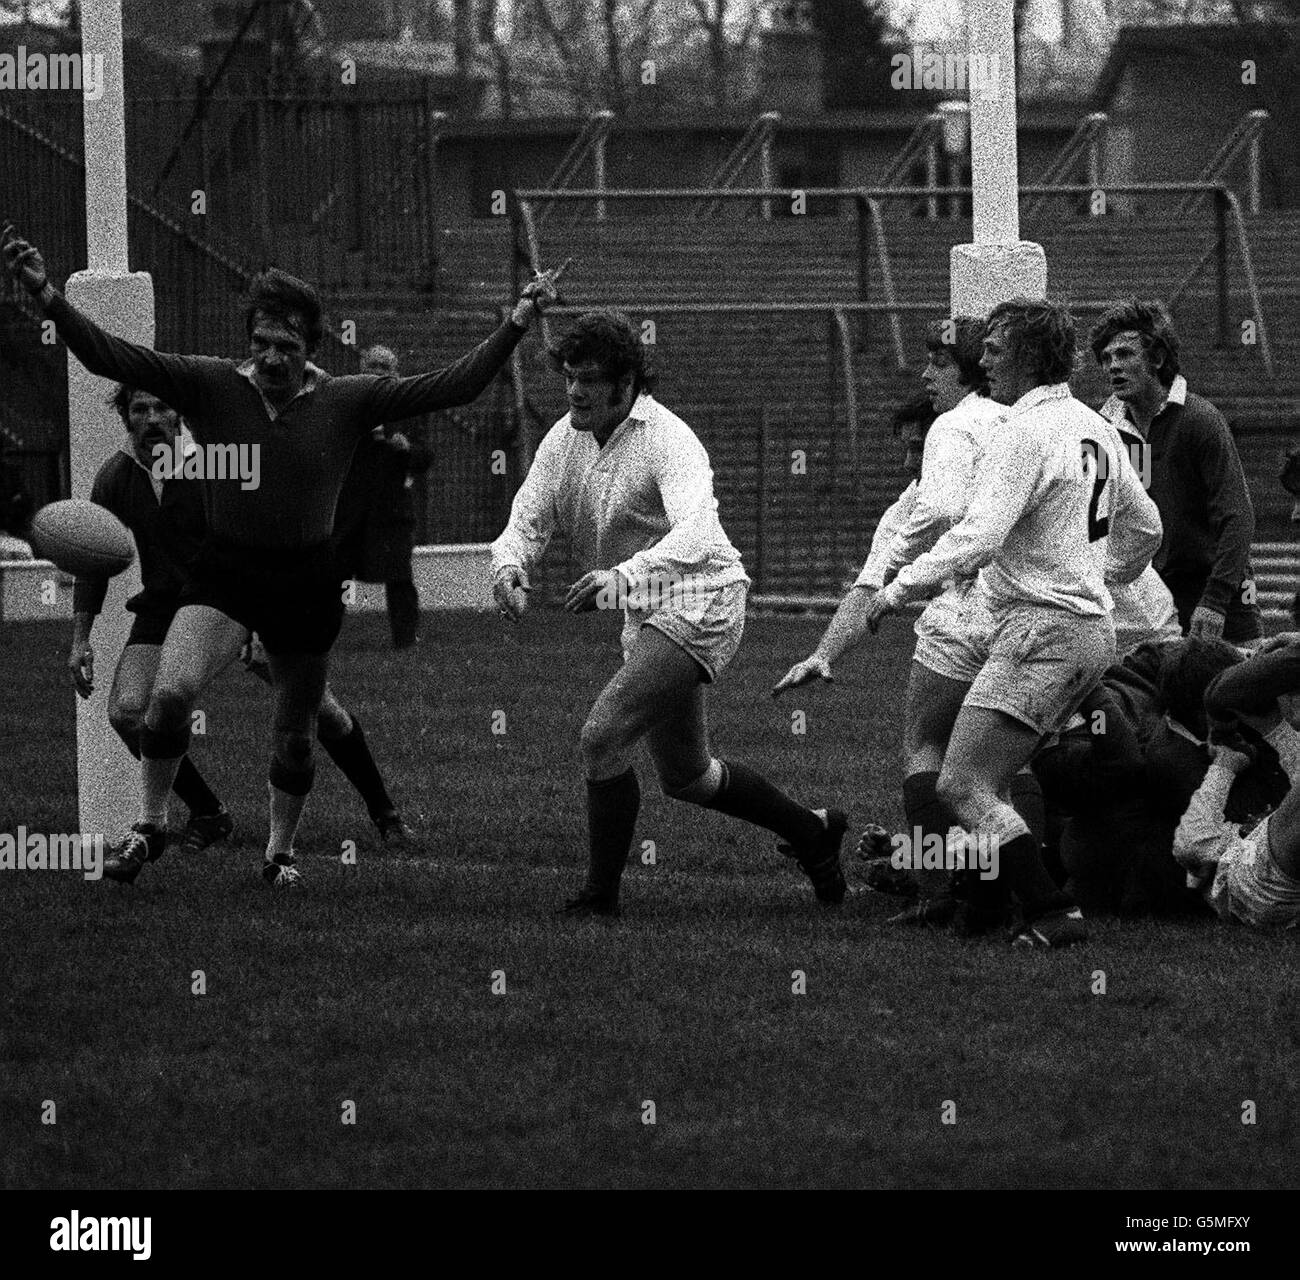 Fran Cotton action. Fran Edward Cotton (centre, white shirt), 26, England's new rugby captain. He is a teacher at a preparatory school. Stock Photo